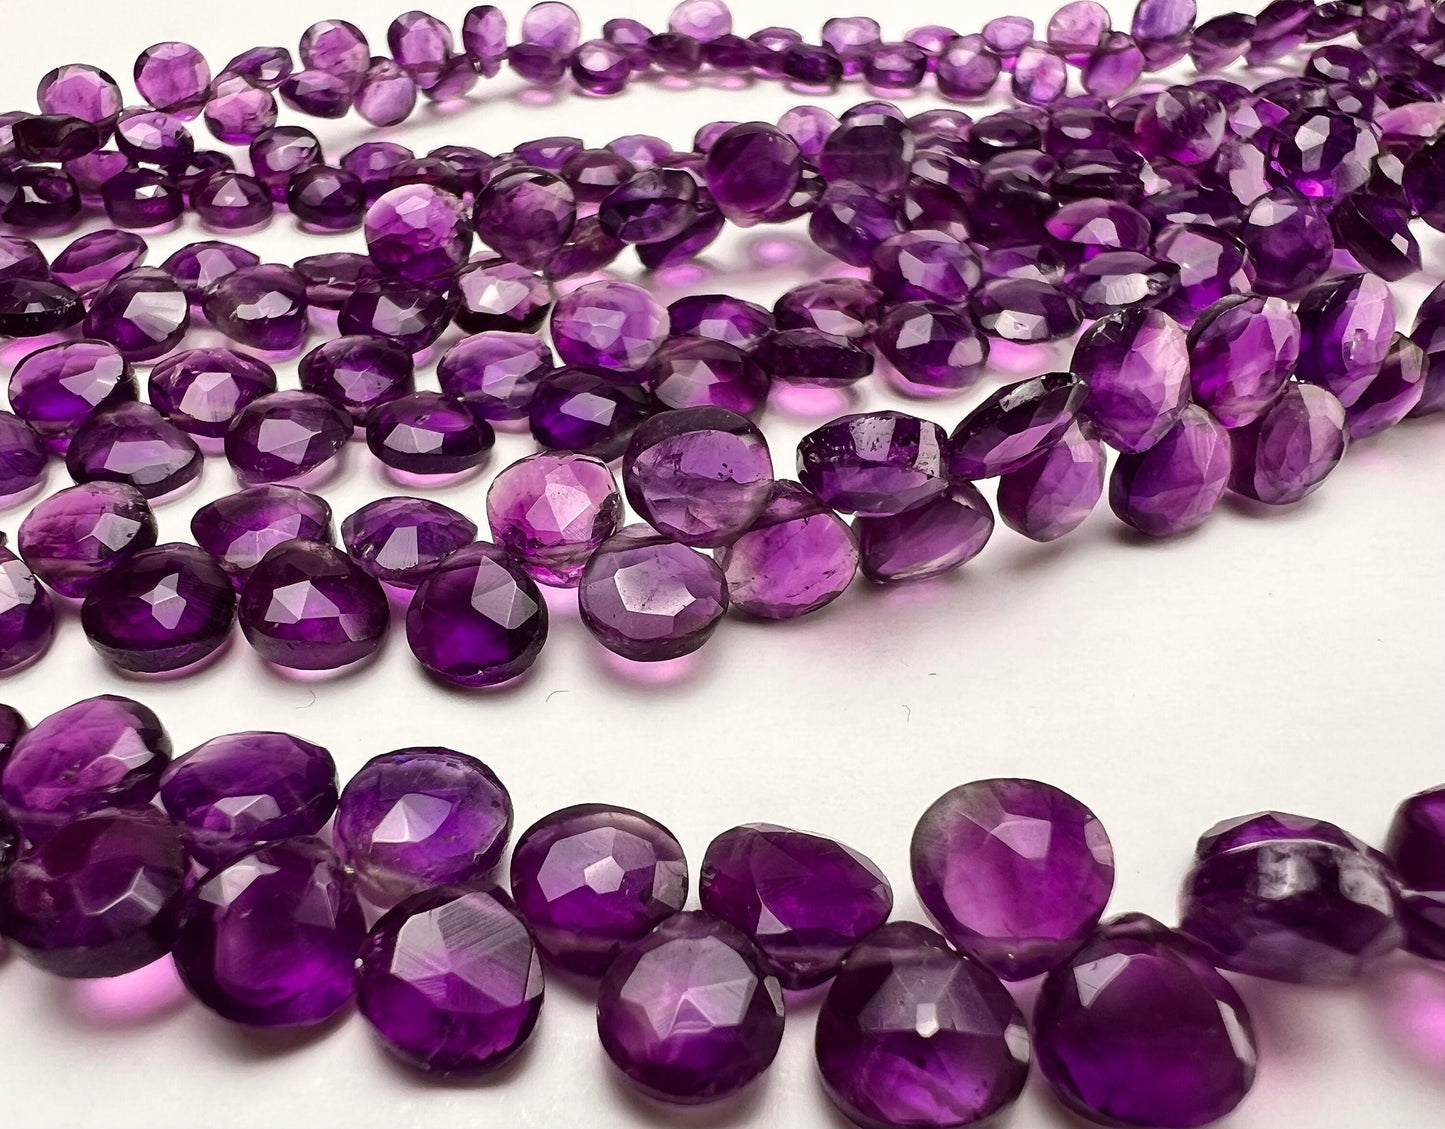 Natural Amethyst Faceted heart 5-7mm drop for Jewelry Making DIY Gemstone Beads . 10, 20, 30 pcs